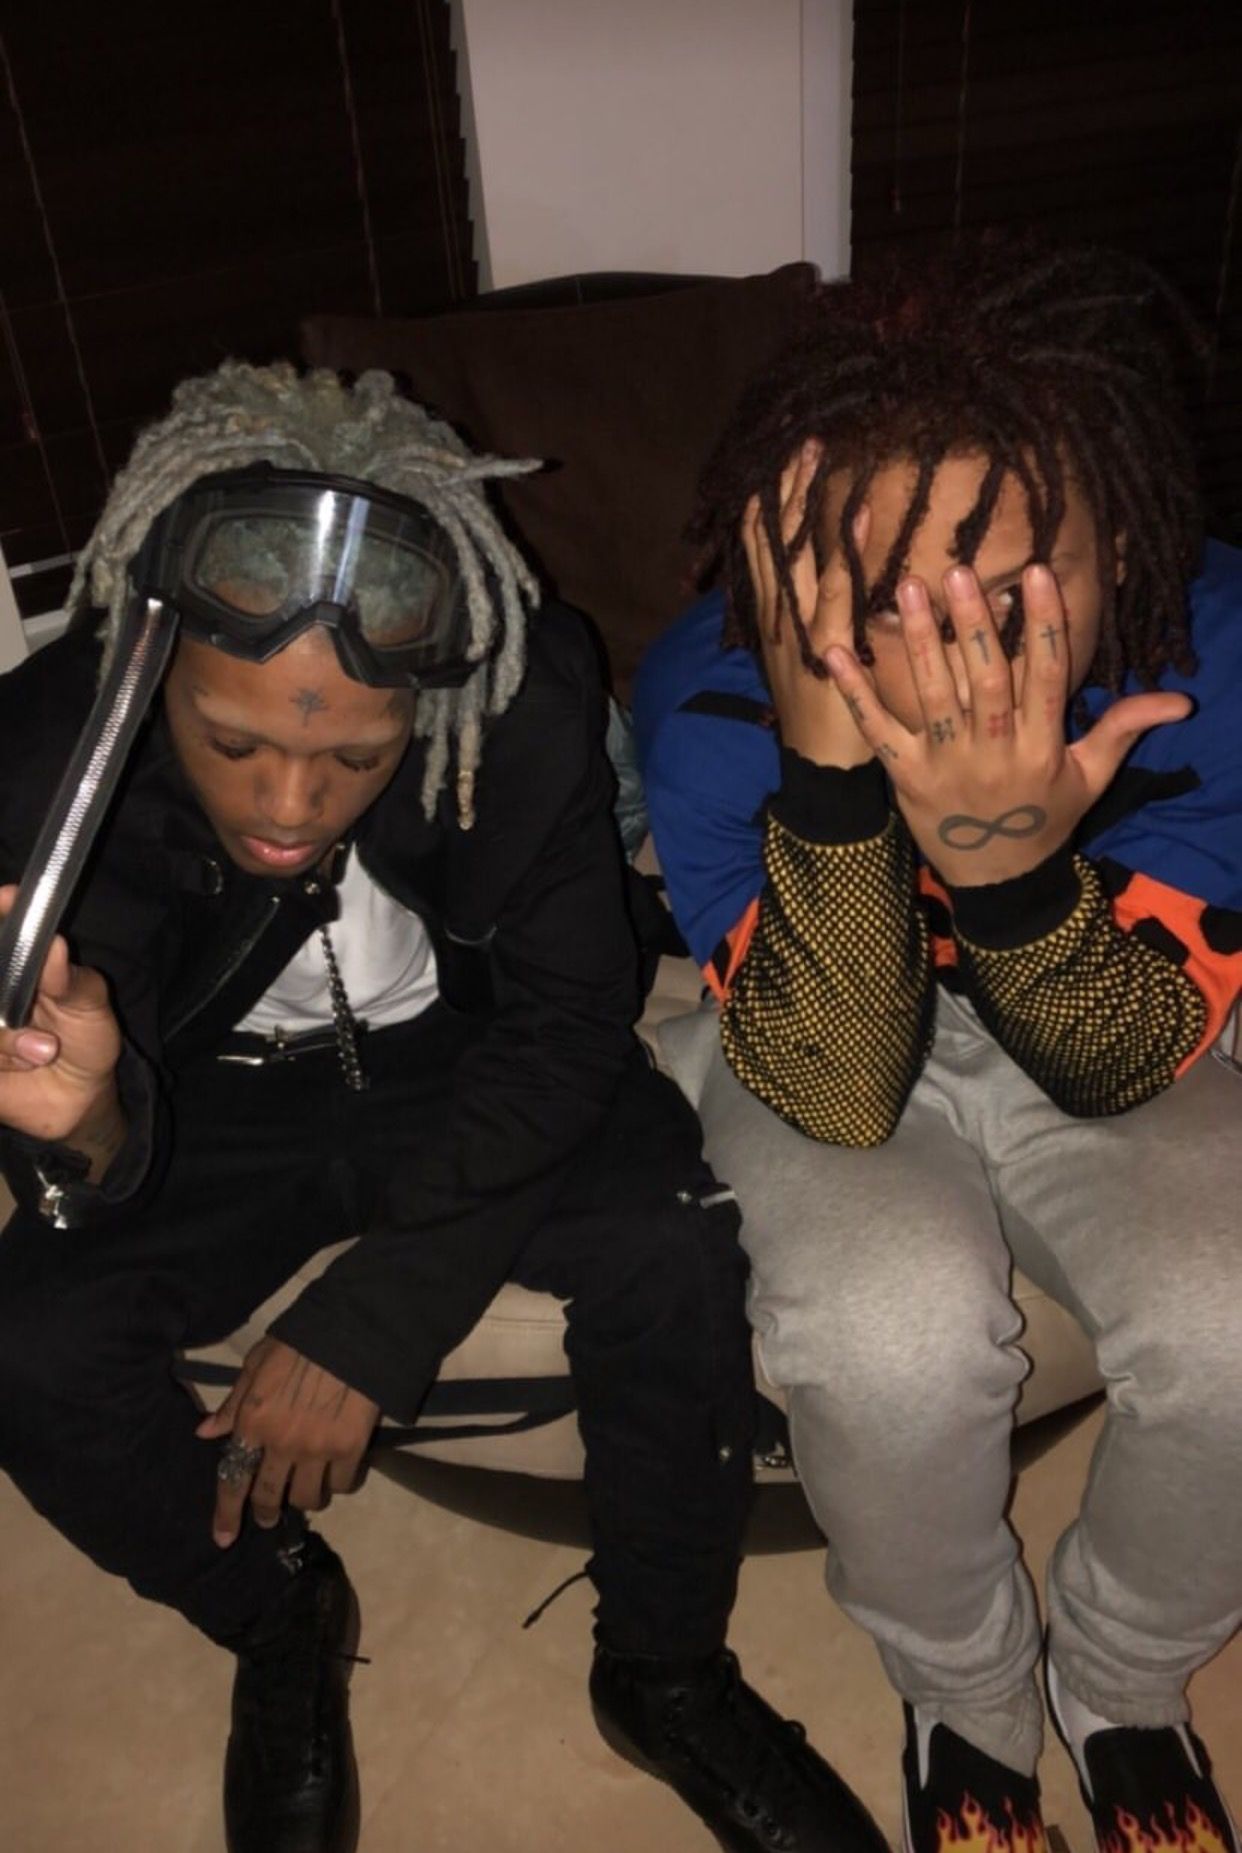 Juice WRLD and Trippie Redd sitting on the floor with their hands on their faces - XXXTentacion